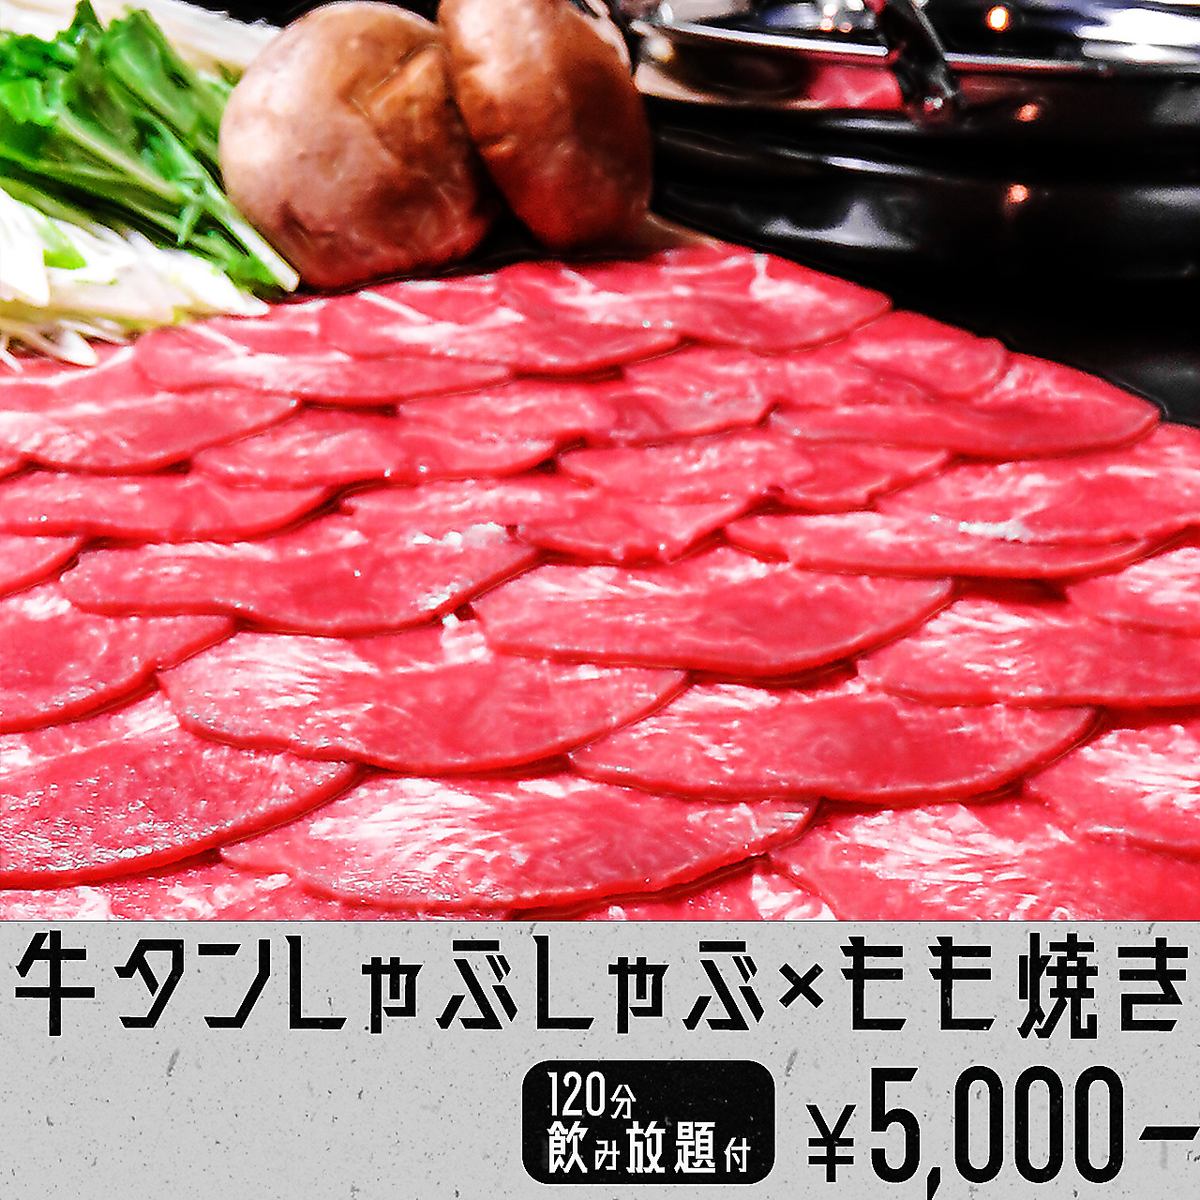 Very popular ◎ Direct delivery from the butcher! Grilled thigh and shabu-shabu course from 5,000 yen